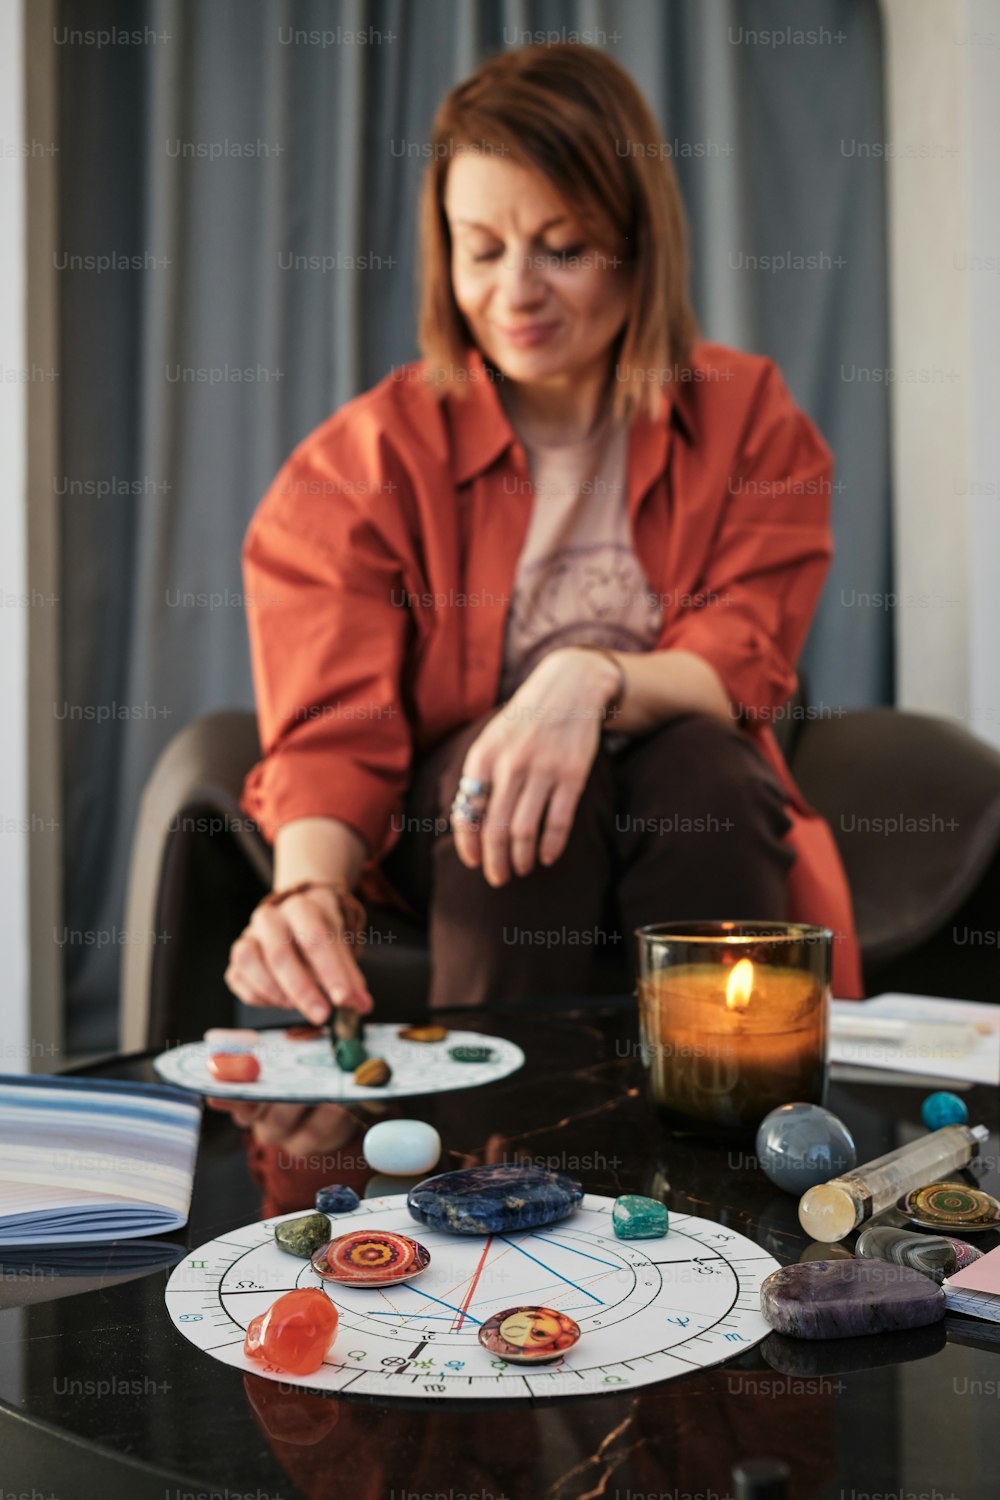 a woman sitting at a table with a plate of planets on it